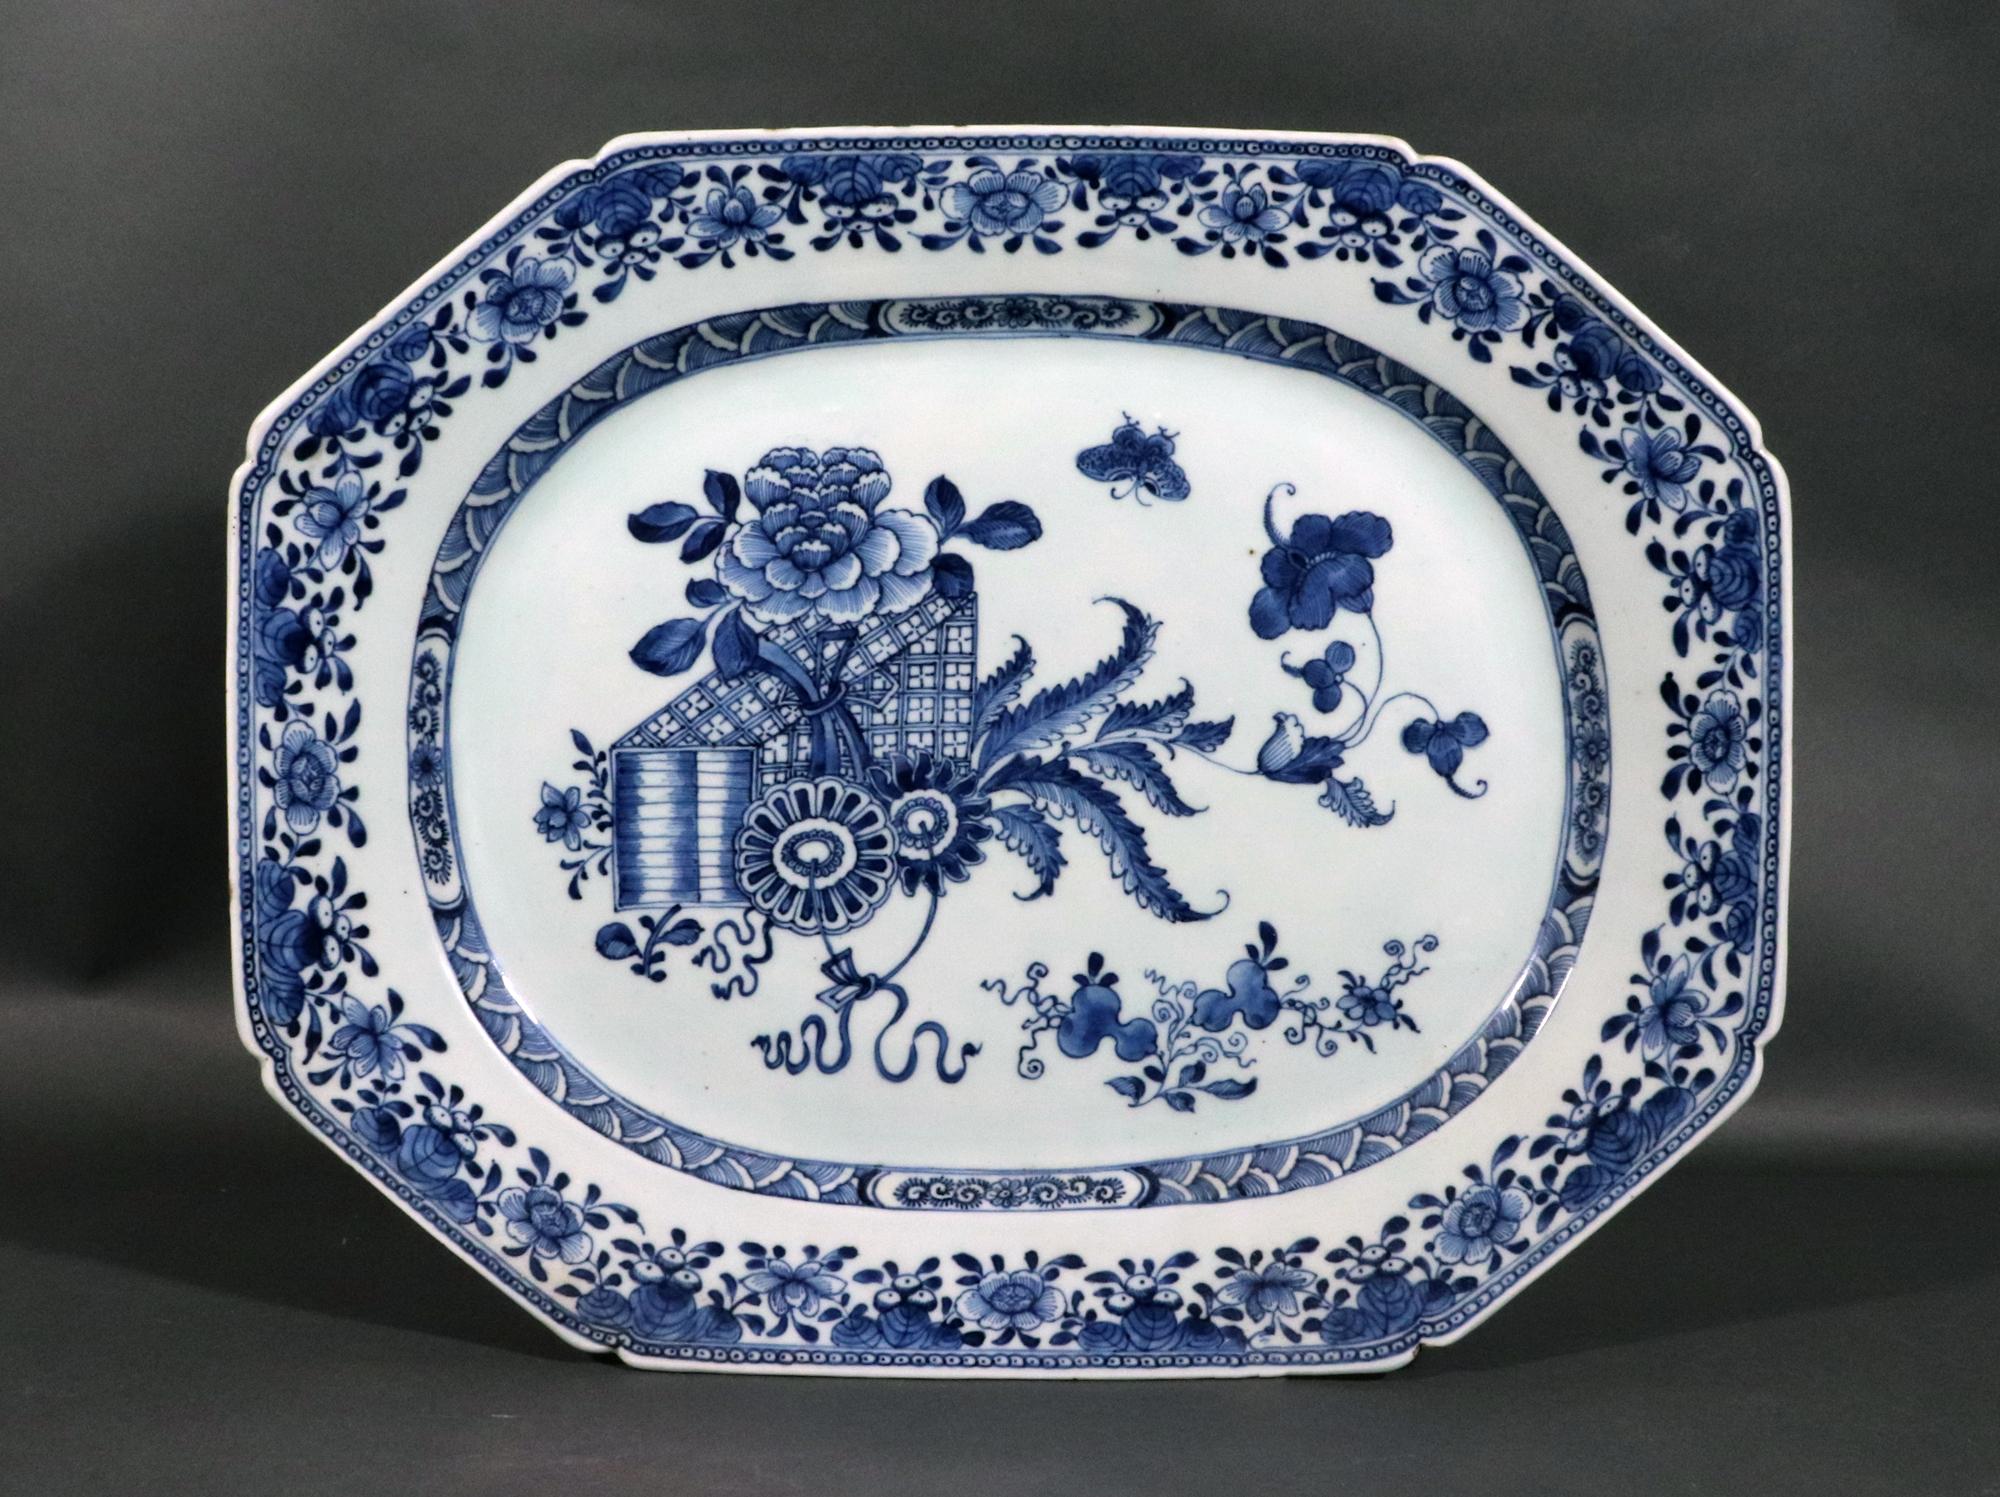 Chinese Export Large Underglaze Blue & White Porcelain Dish,
Circa 1770

The large attractive Chinese Export Blue and White Porcelain dish is unusually painted with a rare design.  The design is slightly off center with several fabric-covered